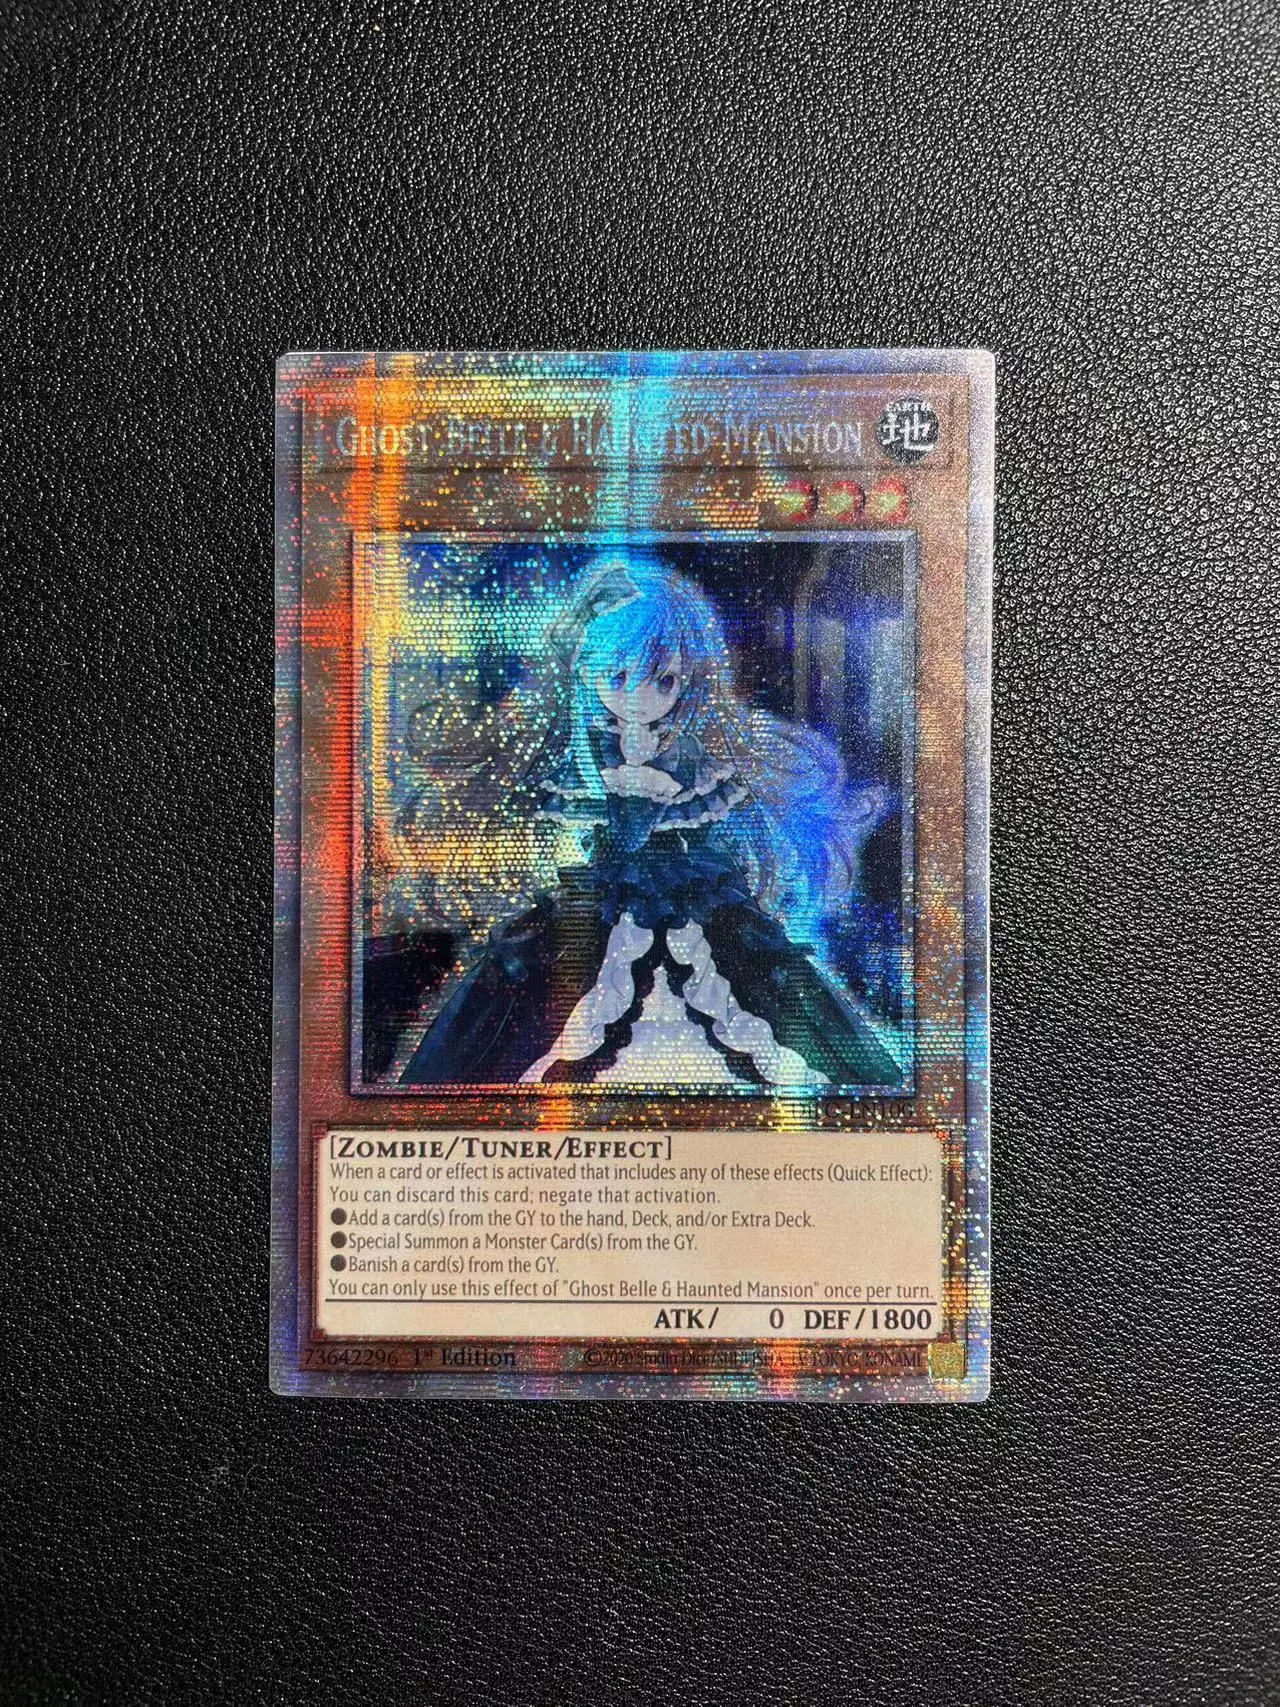 

Yu-Gi-Oh PSER DIFO-EN100/Ghost Belle & Haunted Mansion Children's anime cartoon game card toys collection gift(Not Original)